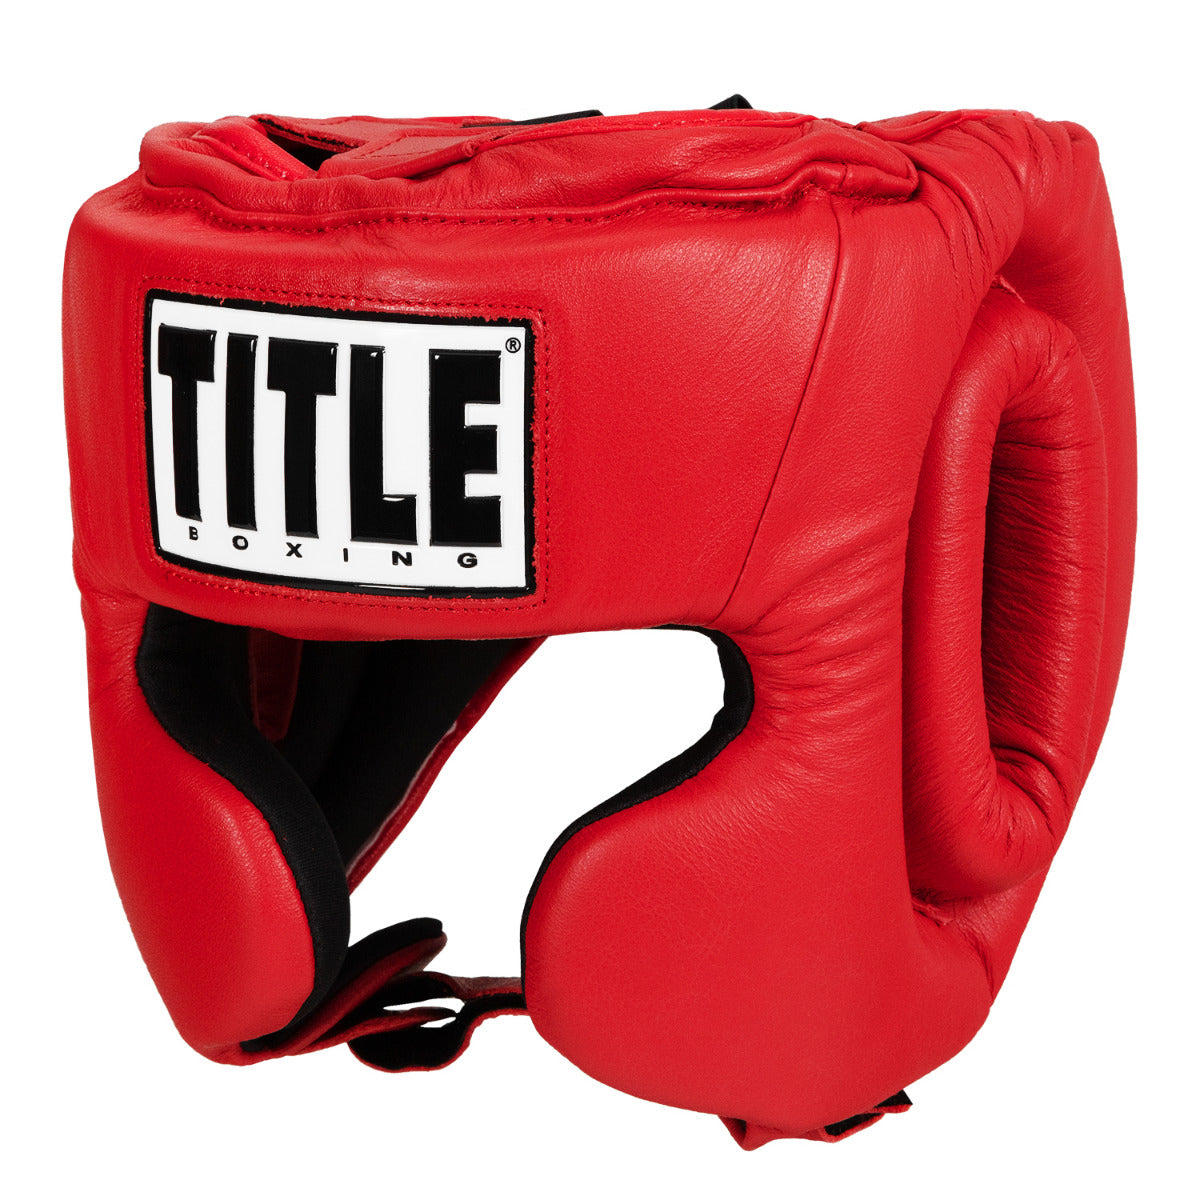 TITLE USA Boxing Masters Competition Headgear 